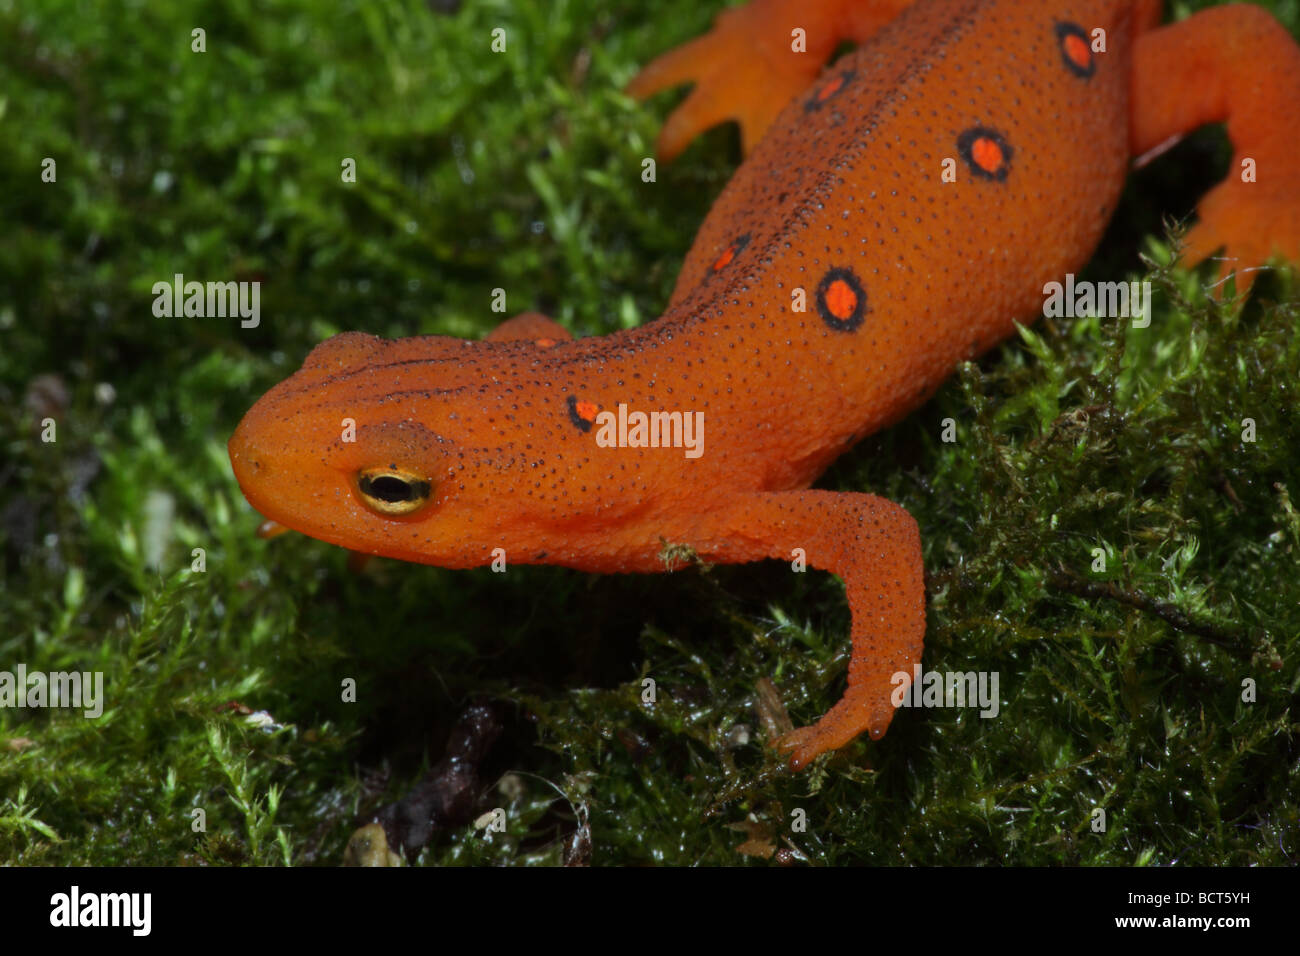 Red Eft - Terrestrial juvenile stage of Red Spotted Newt (Notophthalmus viridescens viridescens) New York - USA Stock Photo